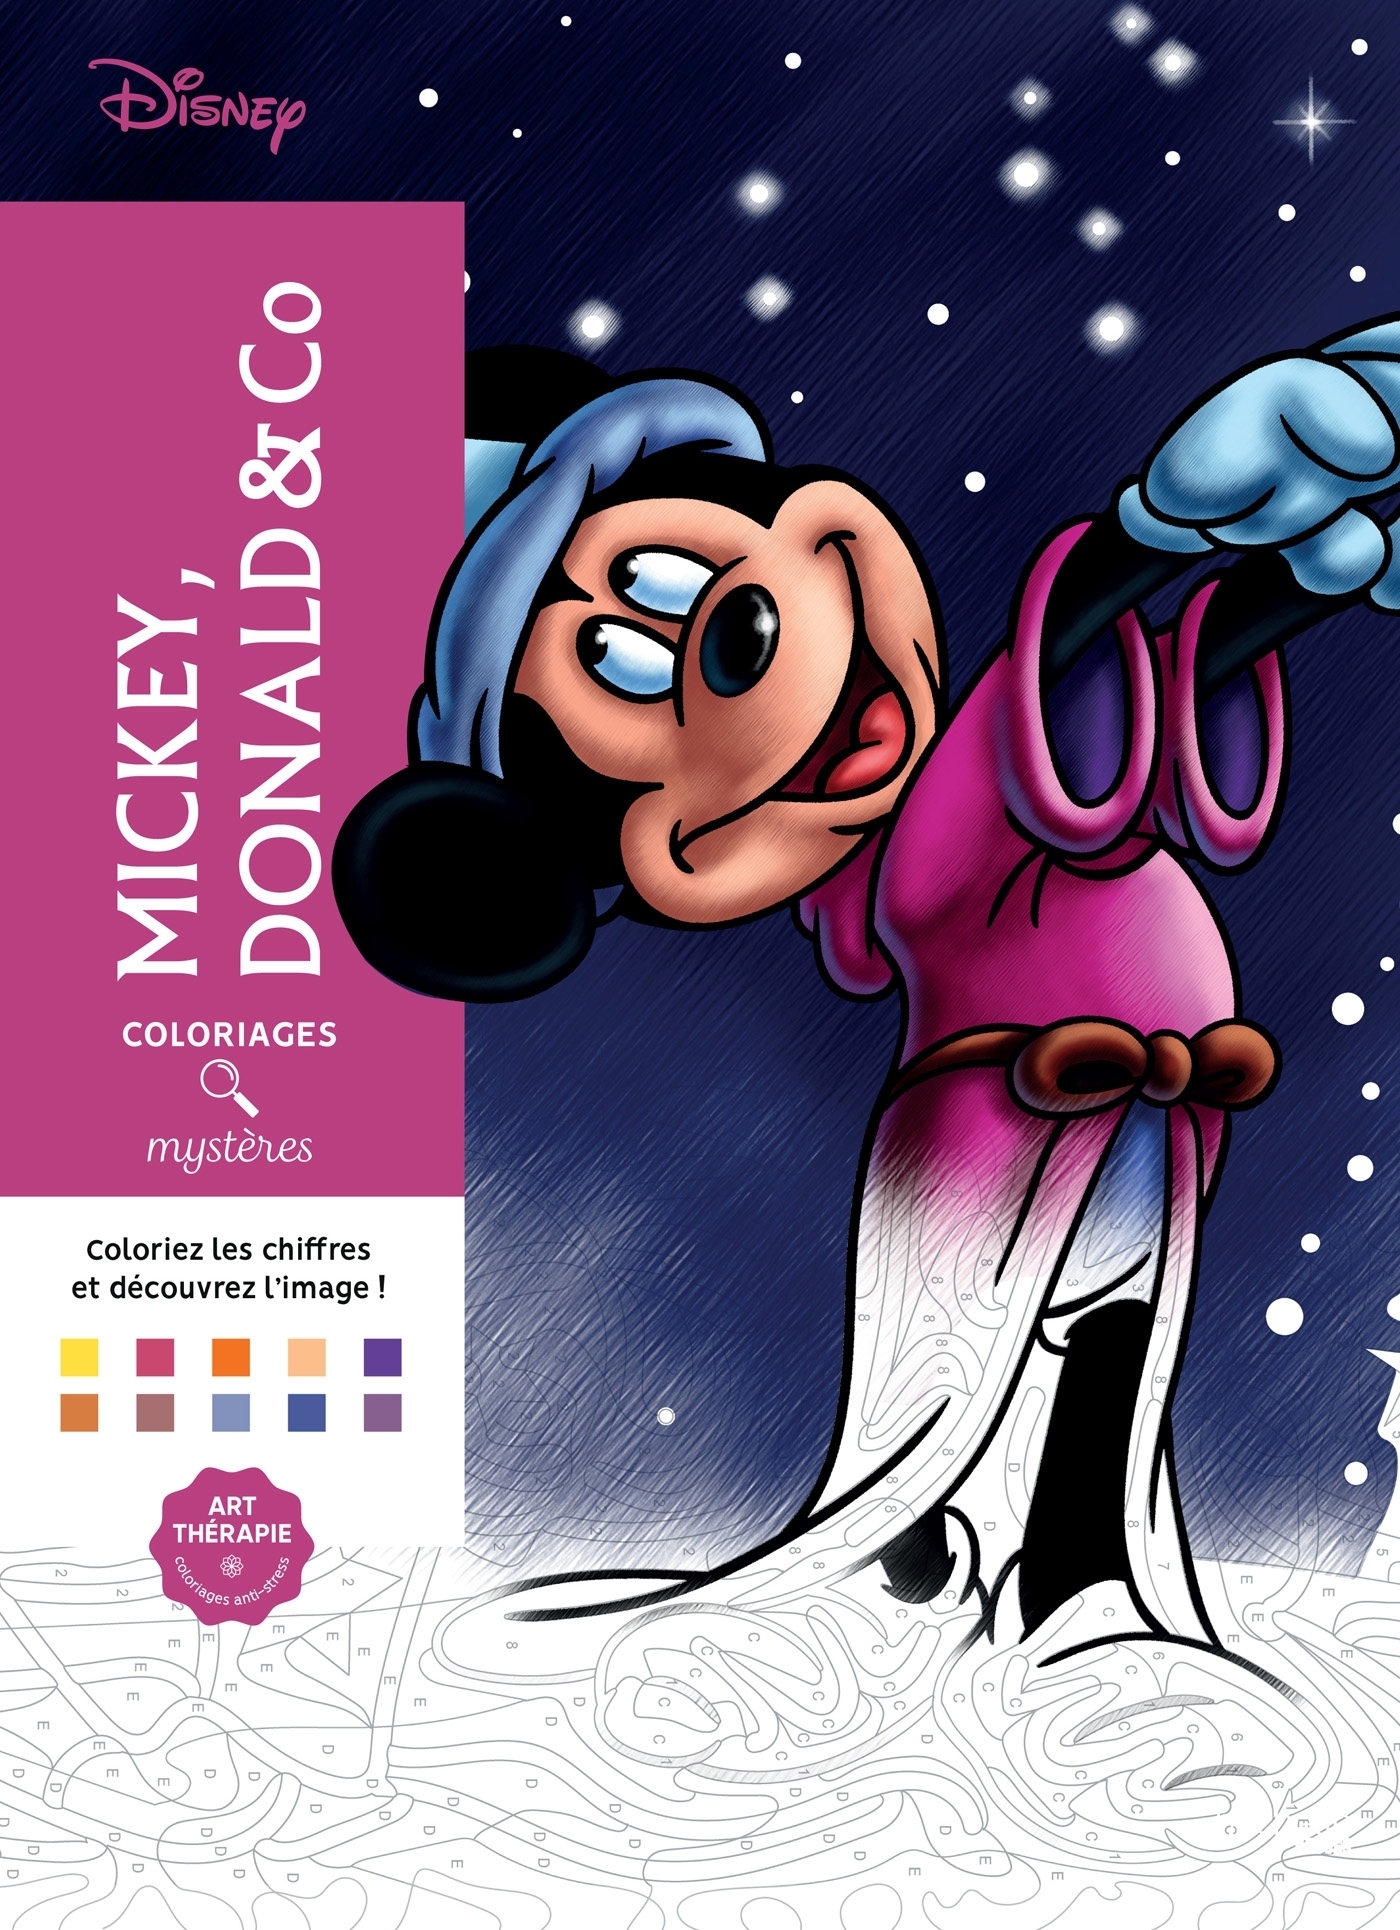 Coloriages mystères Disney - Mickey and friends